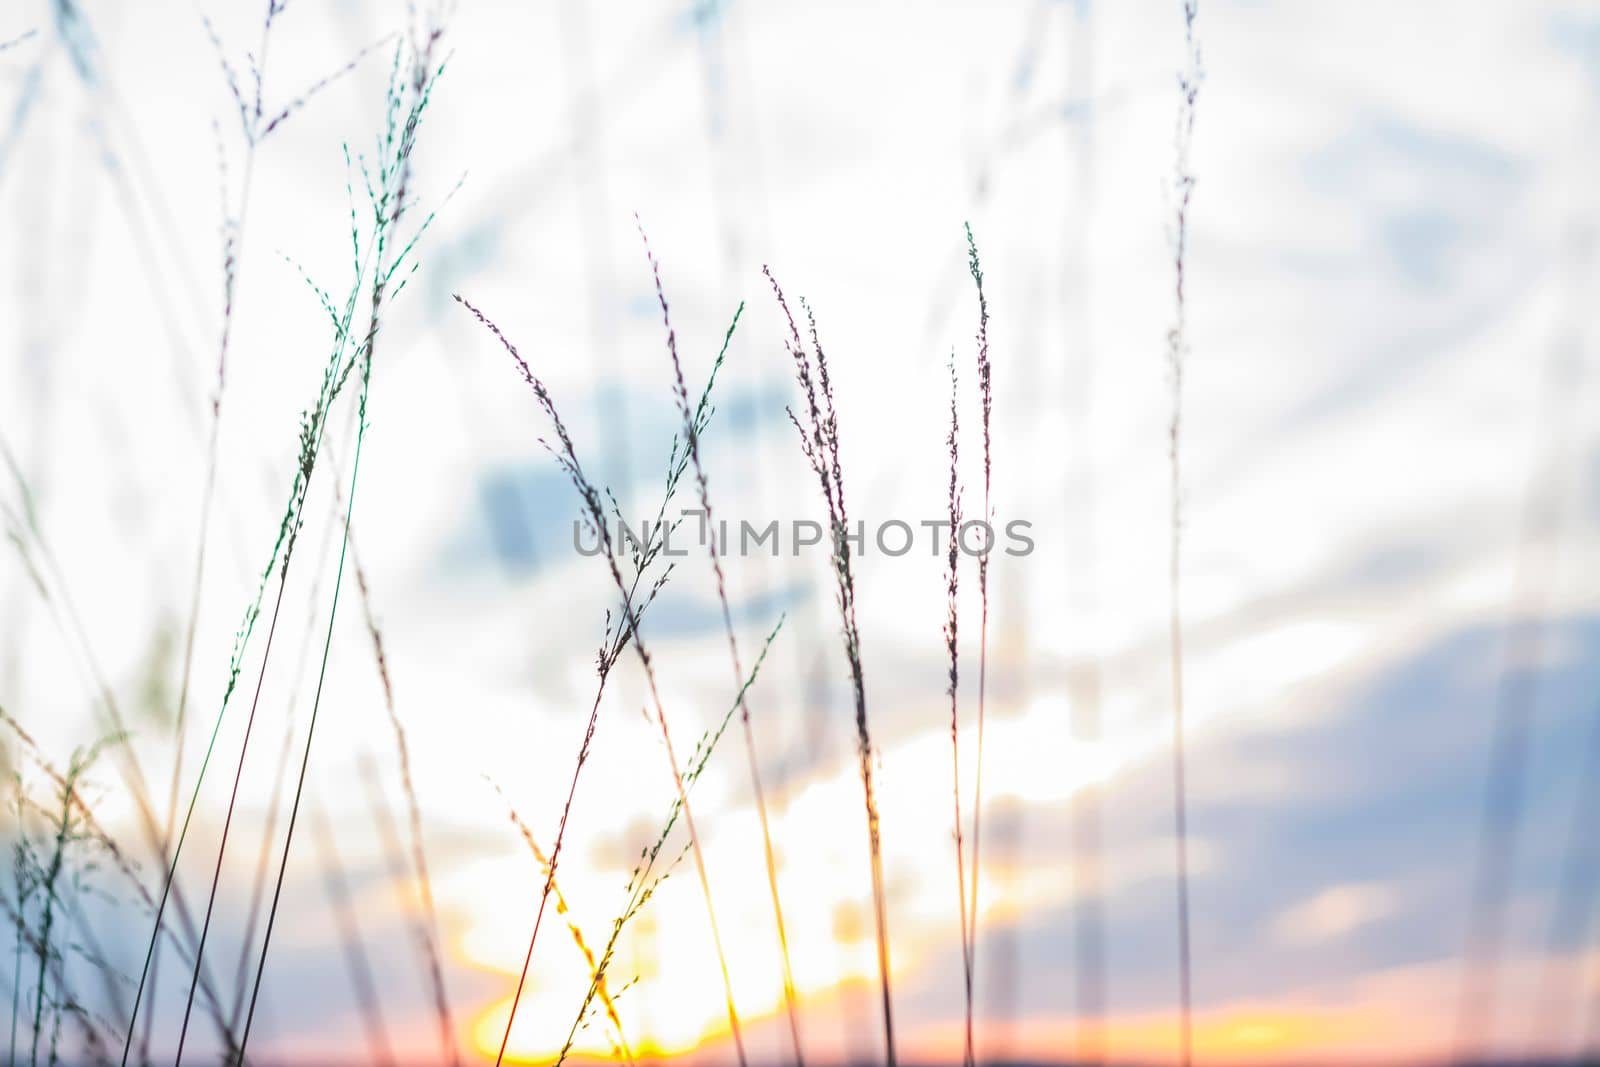 Summer abstract nature background with grass in the meadow and sunset sky behind. Natural landscape. Macro photography of blades of grass. landscape during sunset.